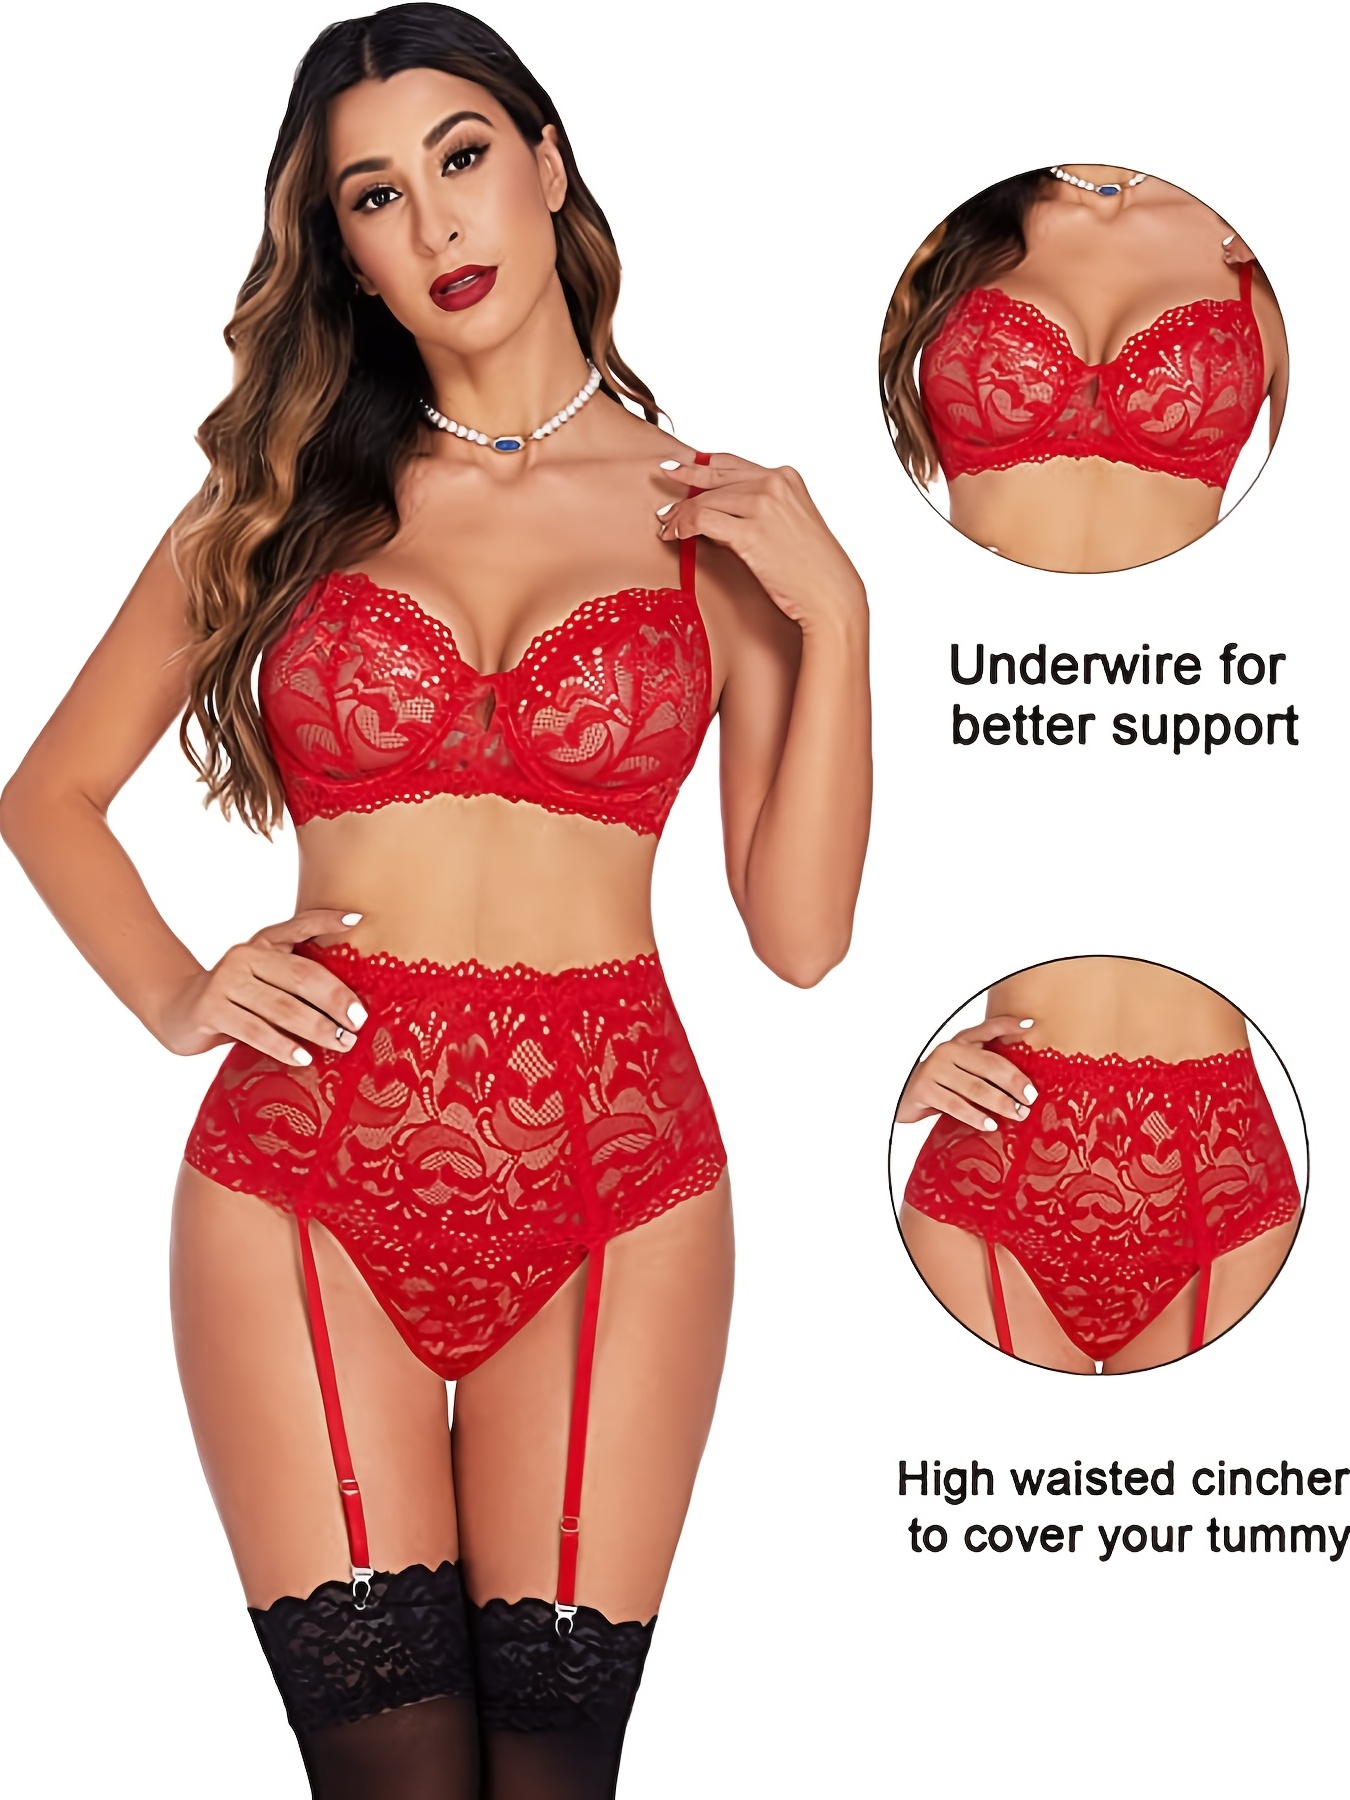 Lace Underwire High Waisted Lingerie Set